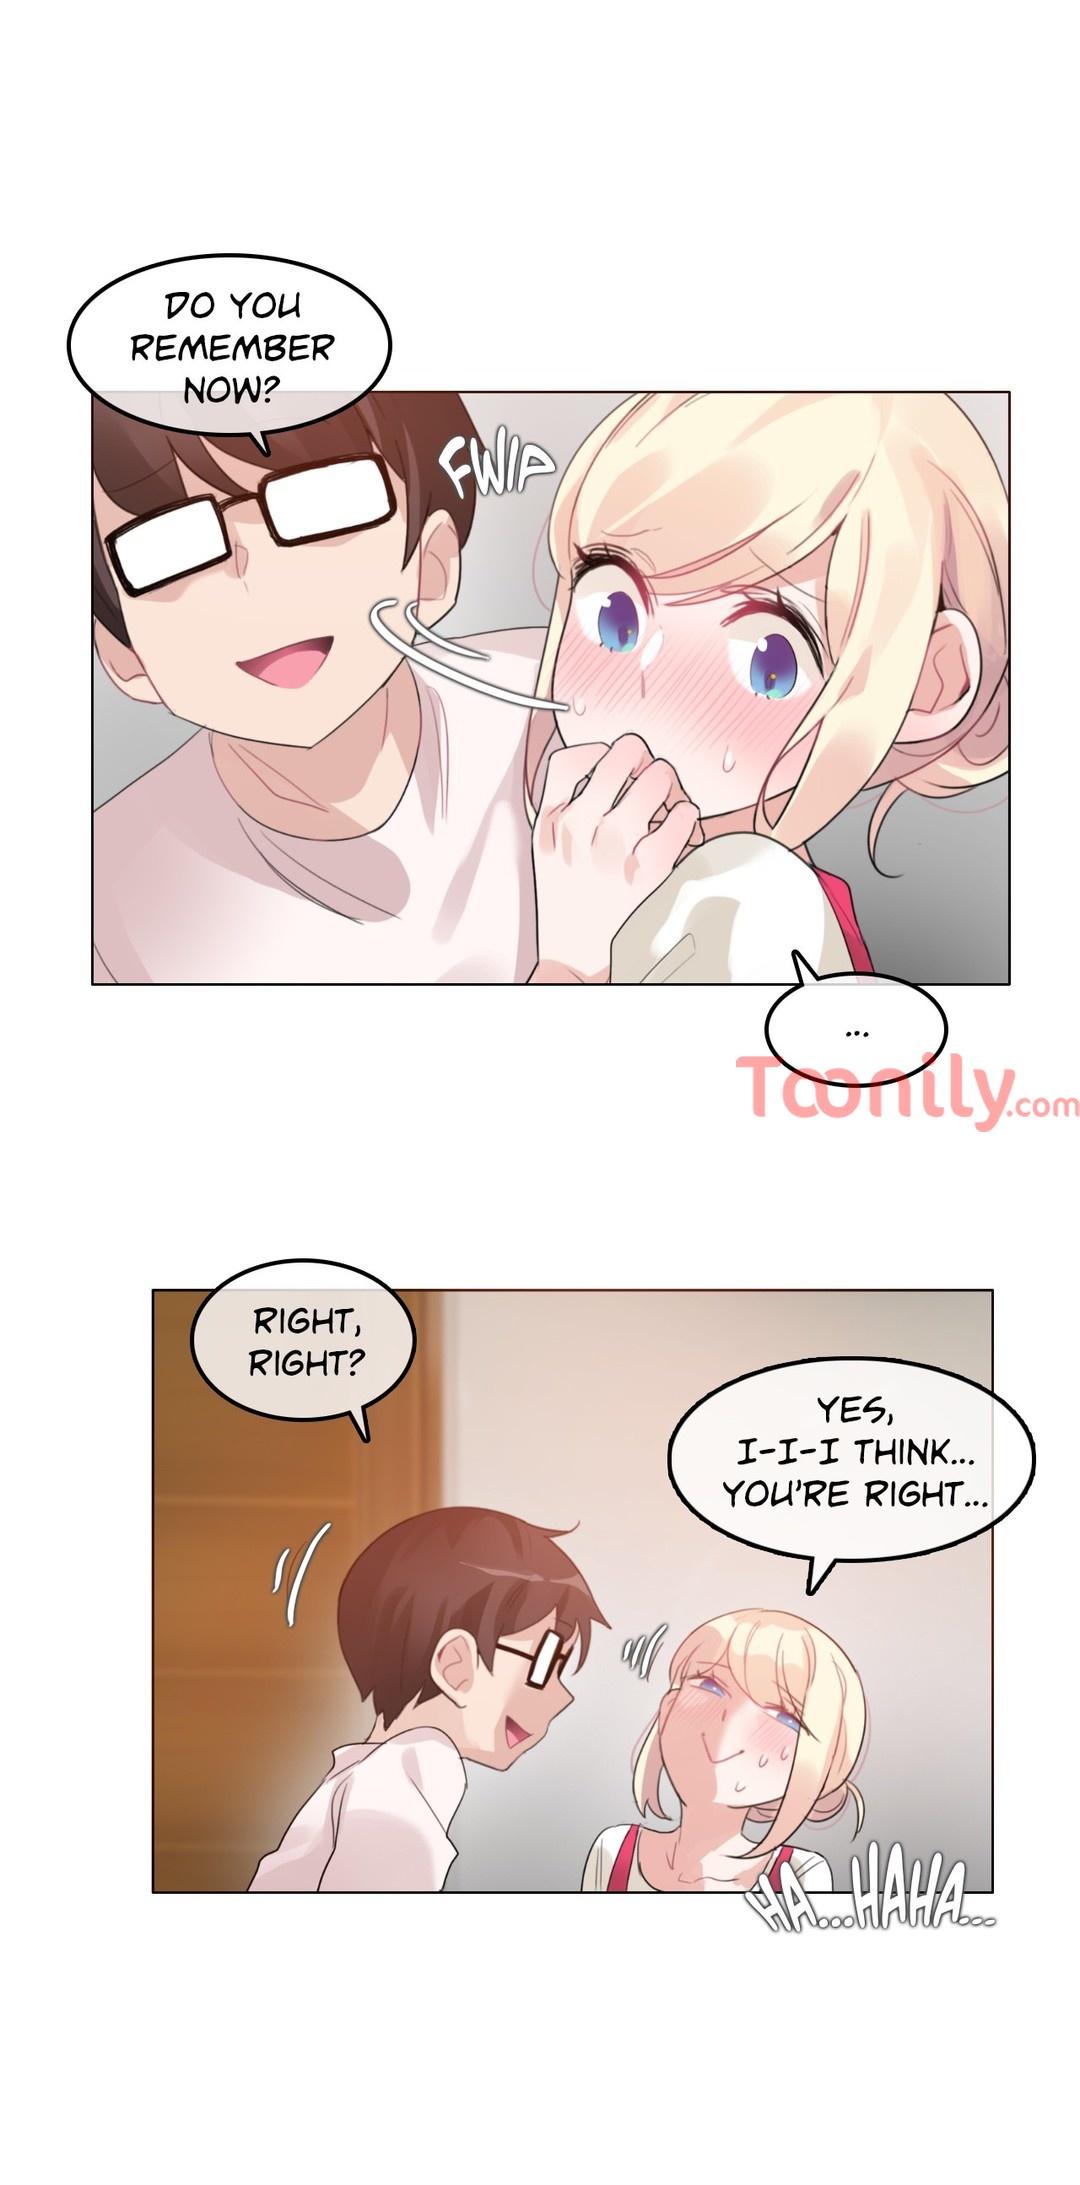 A Pervert's Daily Life • Chapter 61-65 122